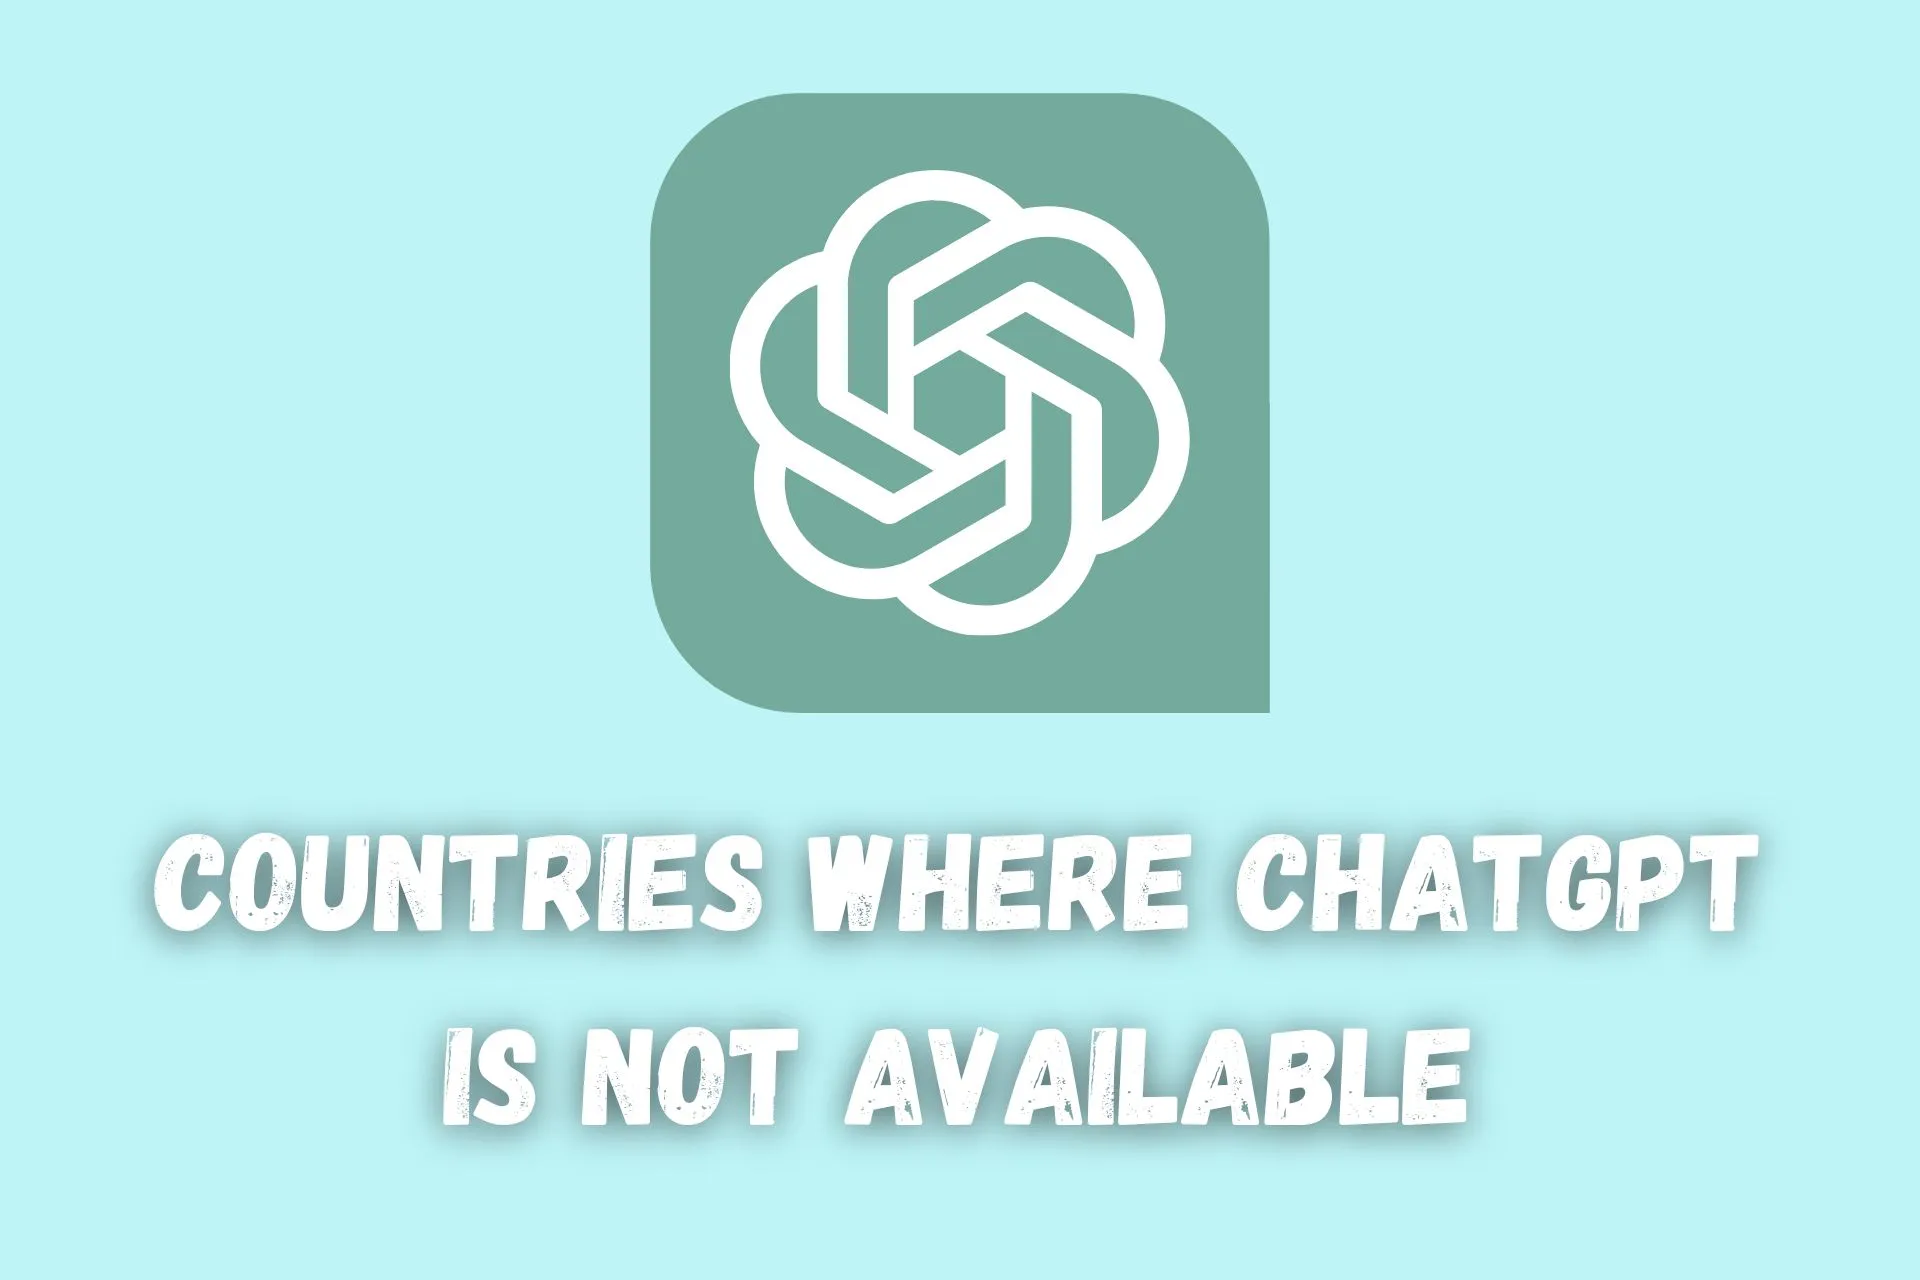 countries where chatgpt is not available